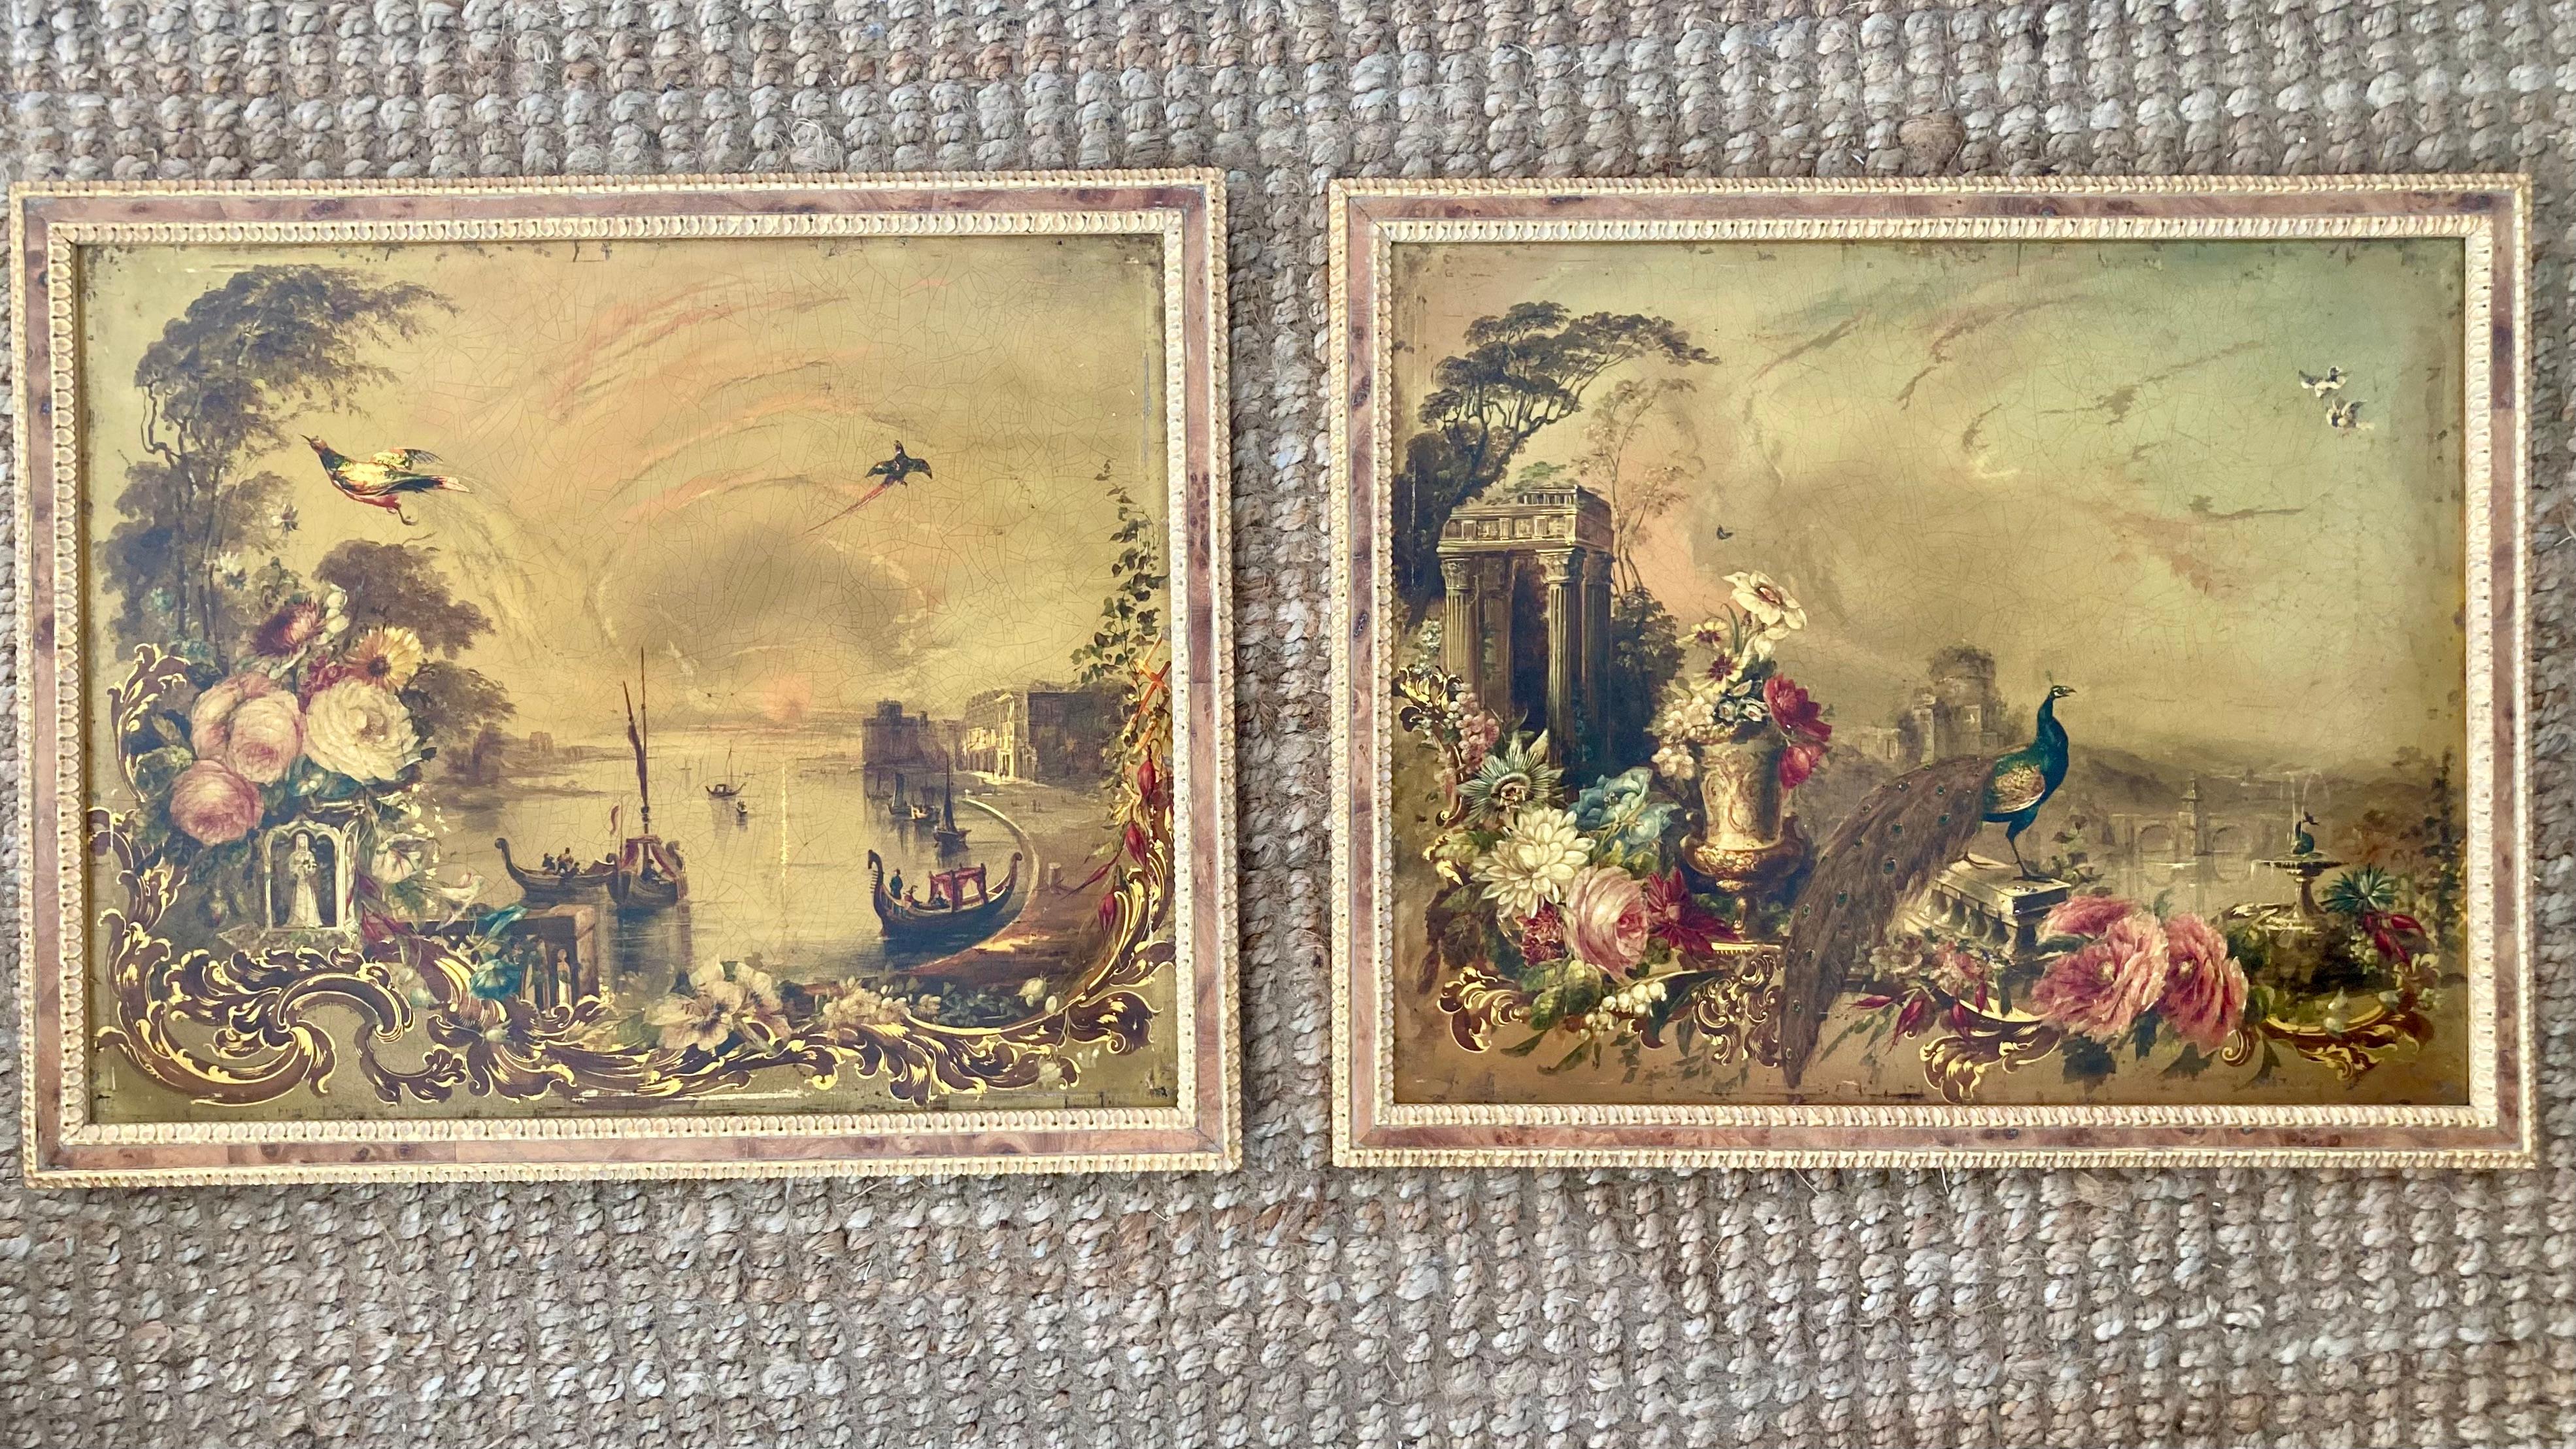 Pair of Beautiful Jennens and Bettridge 19th Century paintings. Floral and Fauna details on both paintings make these a lovelily pair. Both paintings are framed the same and highlight the paintings details.